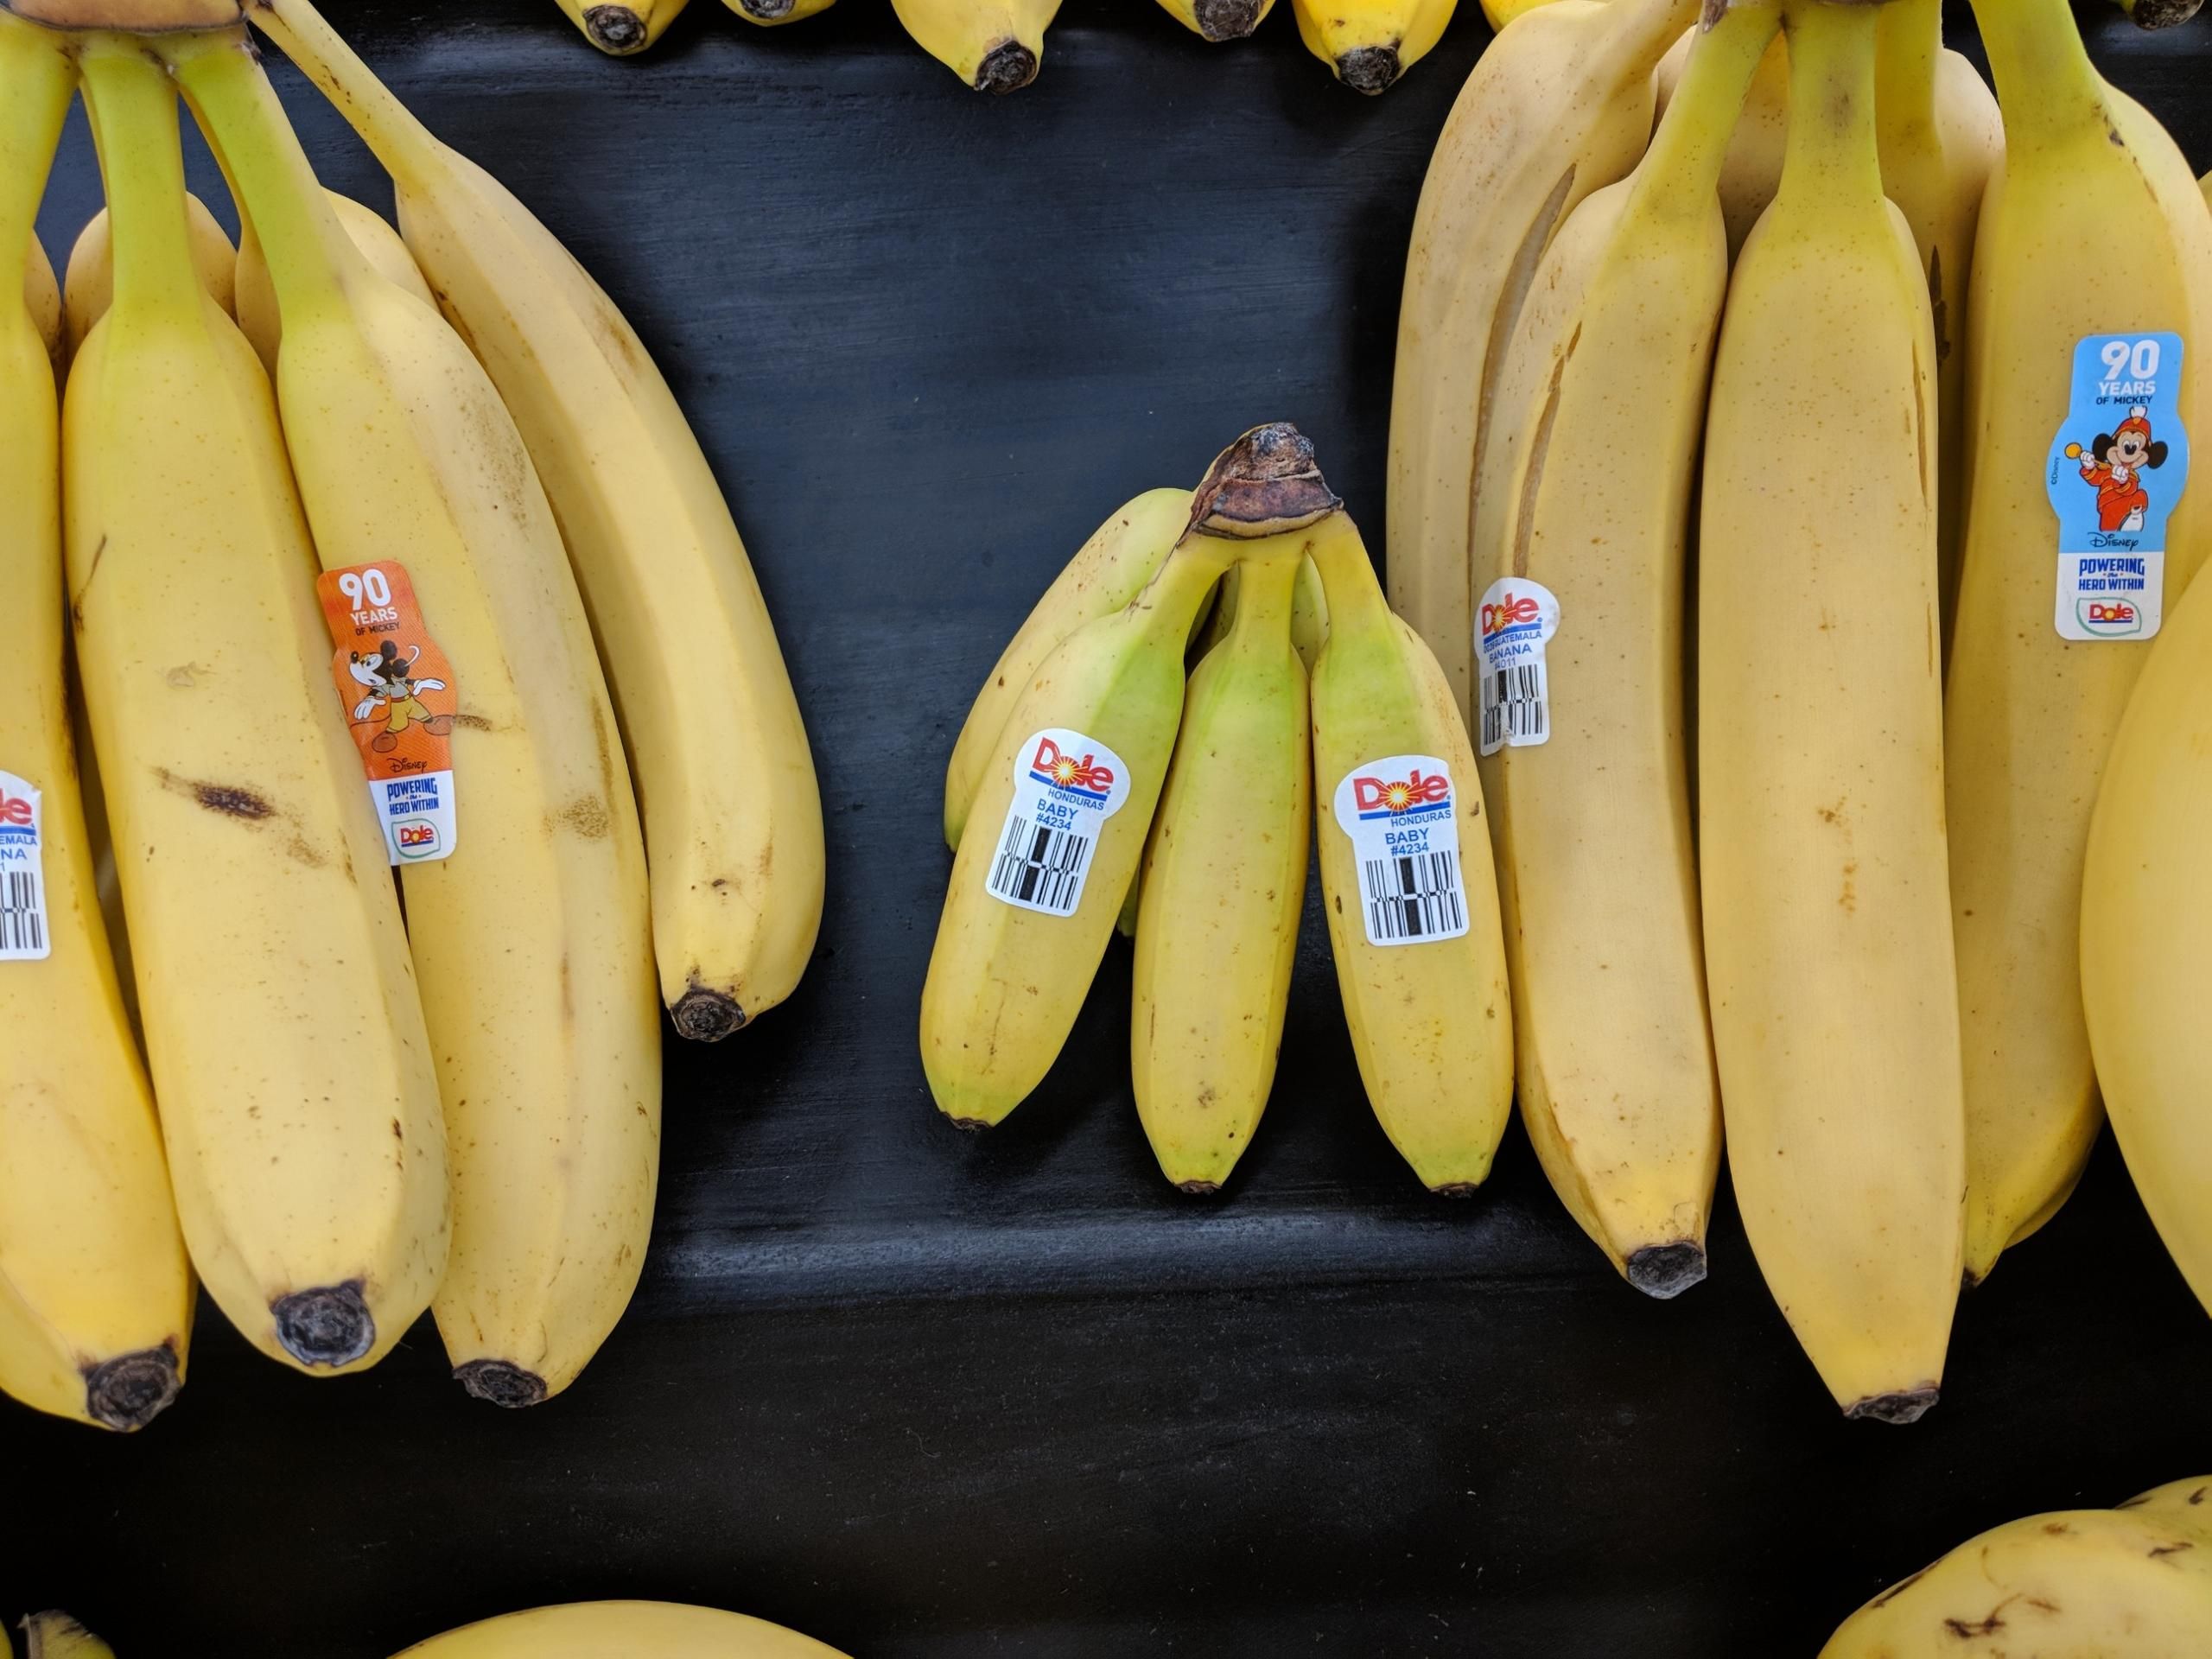 Found Some Small Bananas Bananas For Scale